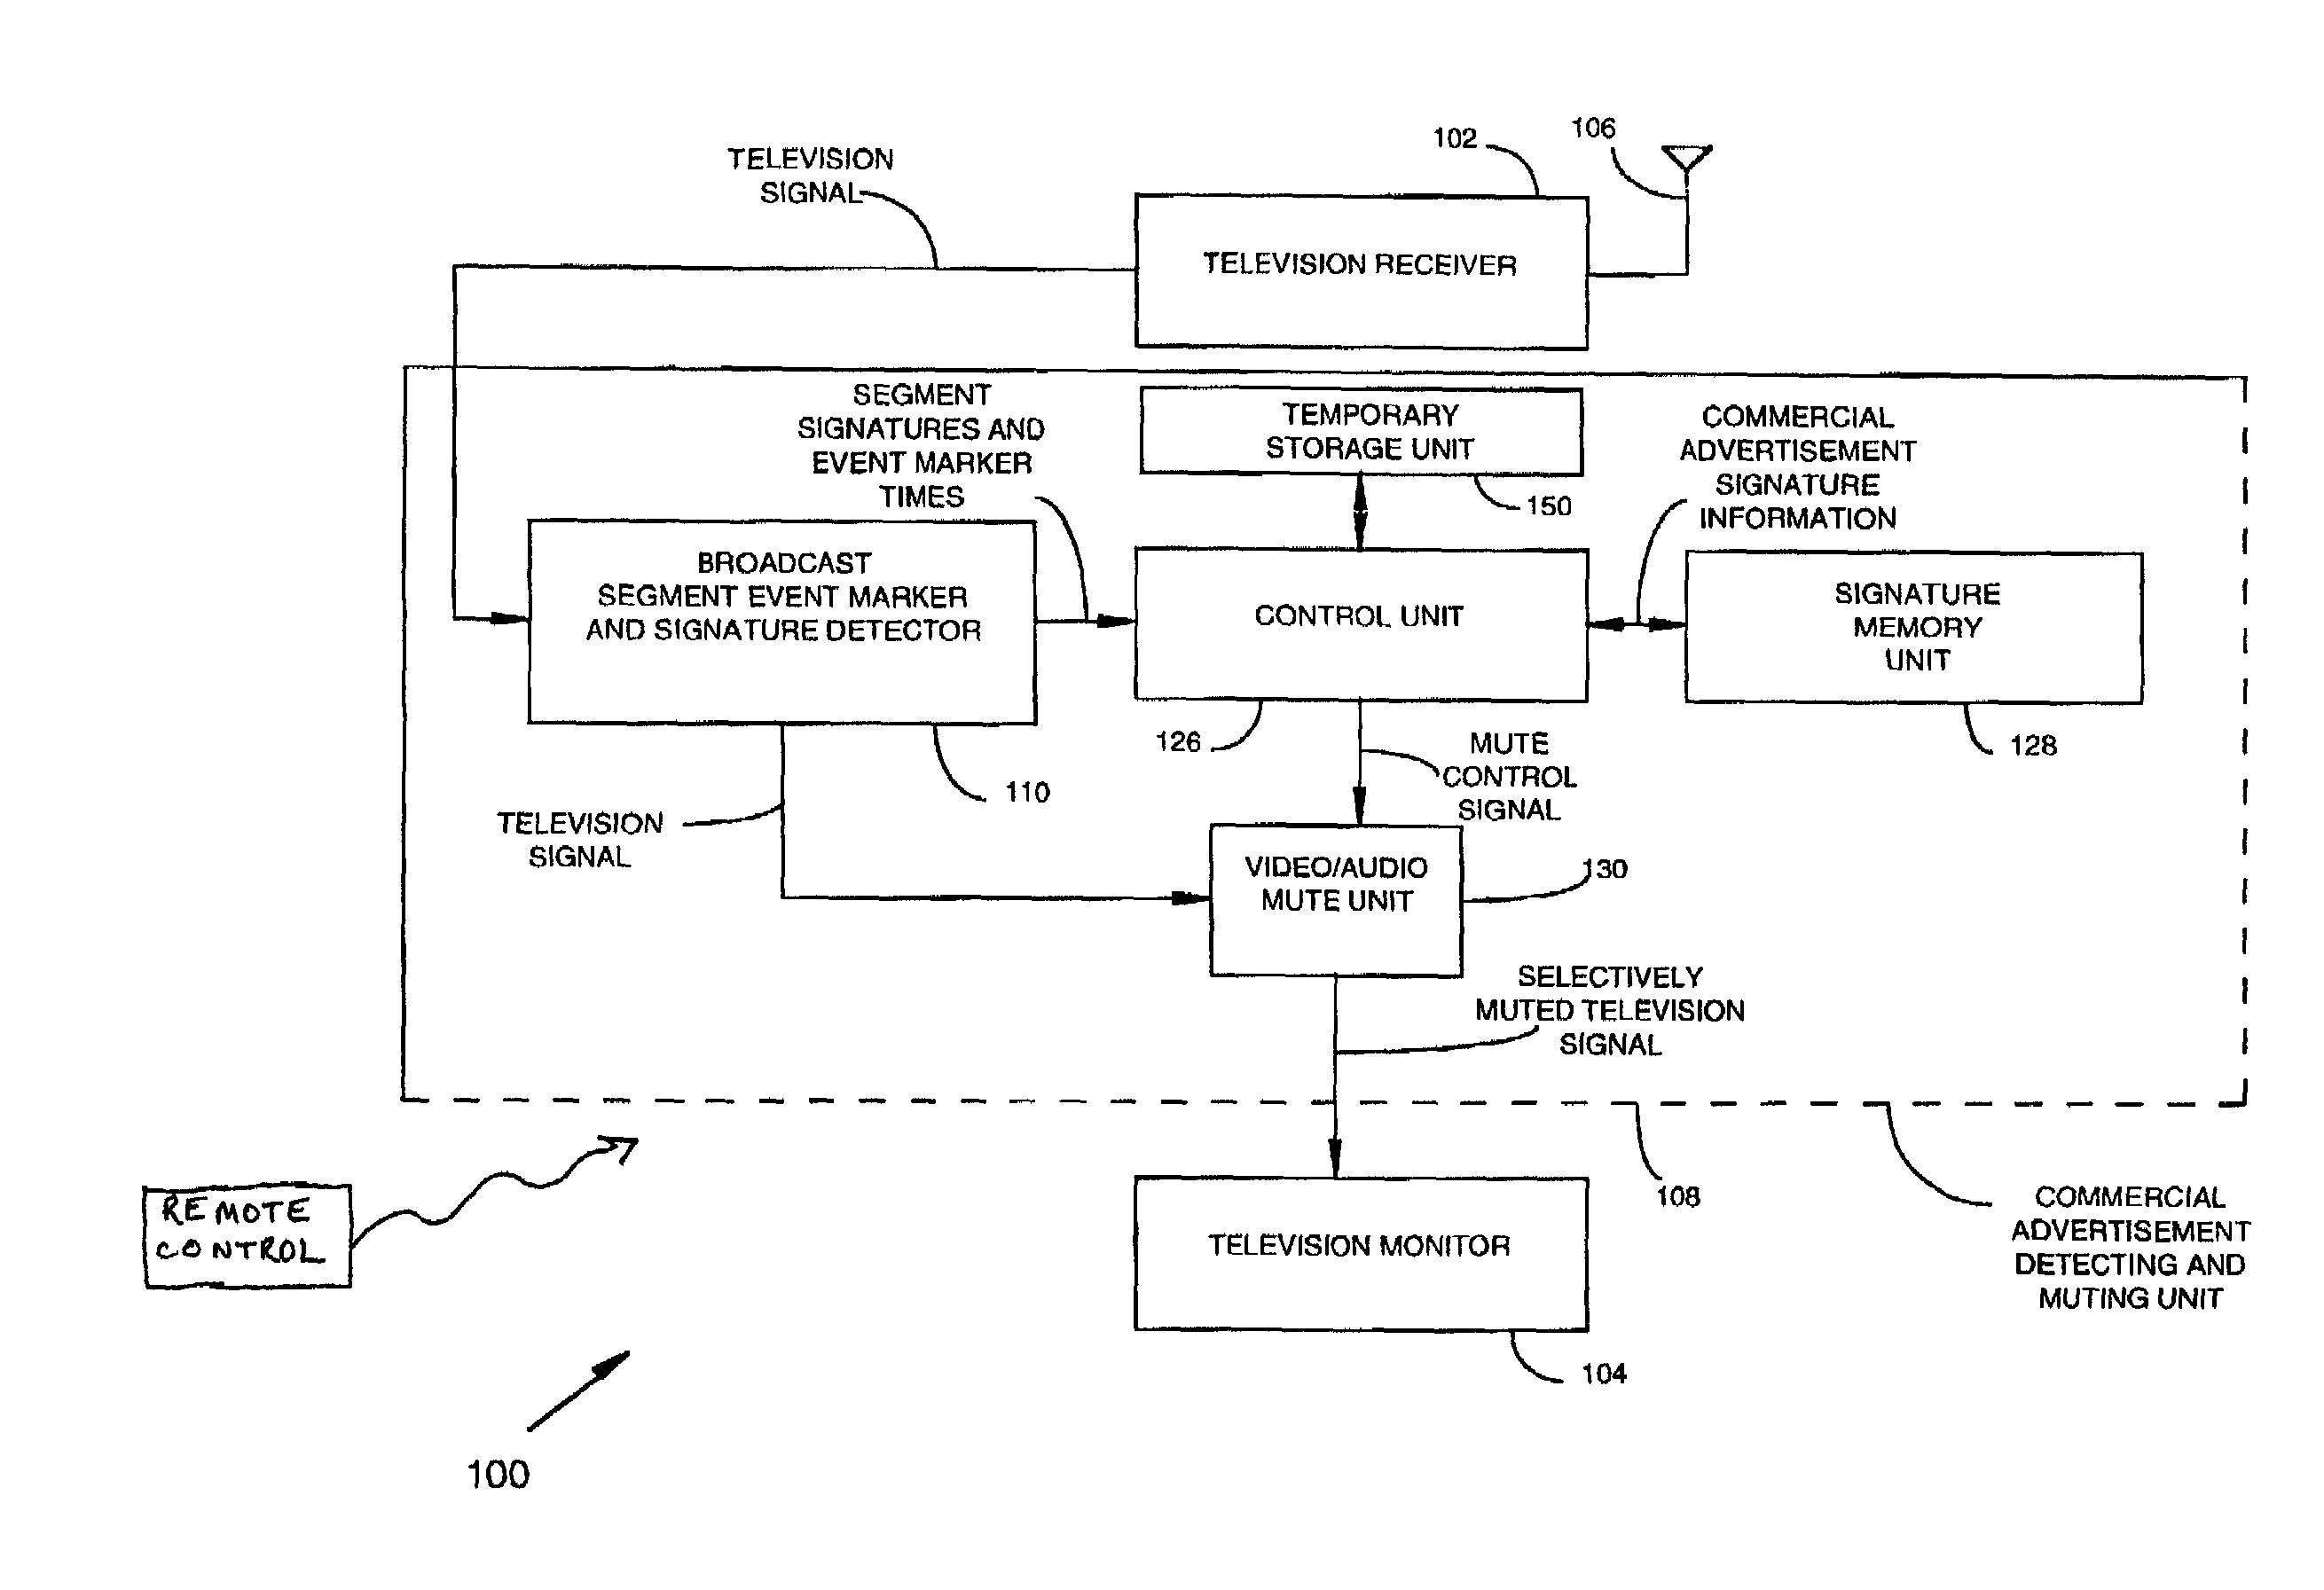 Method and apparatus for controlling a video recorder/player to selectively alter a video signal